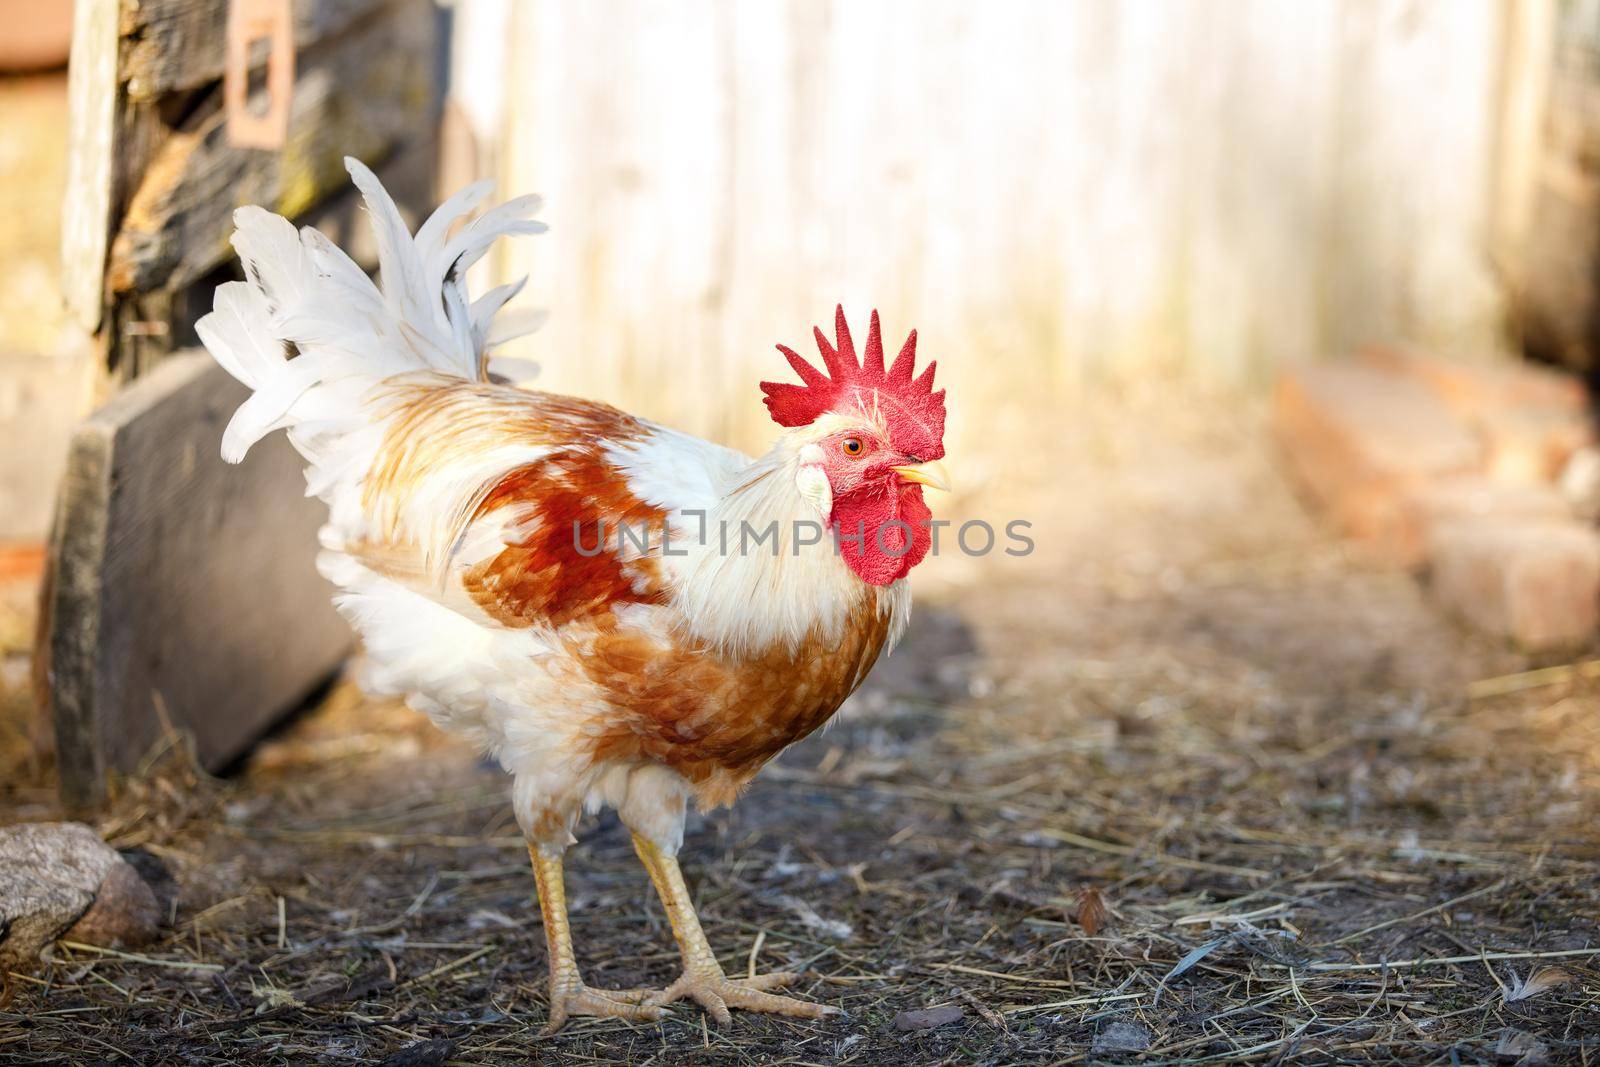 Portrait of a young rooster walking in a rural yard on a sunny day. White and orange colour cock in farm yard